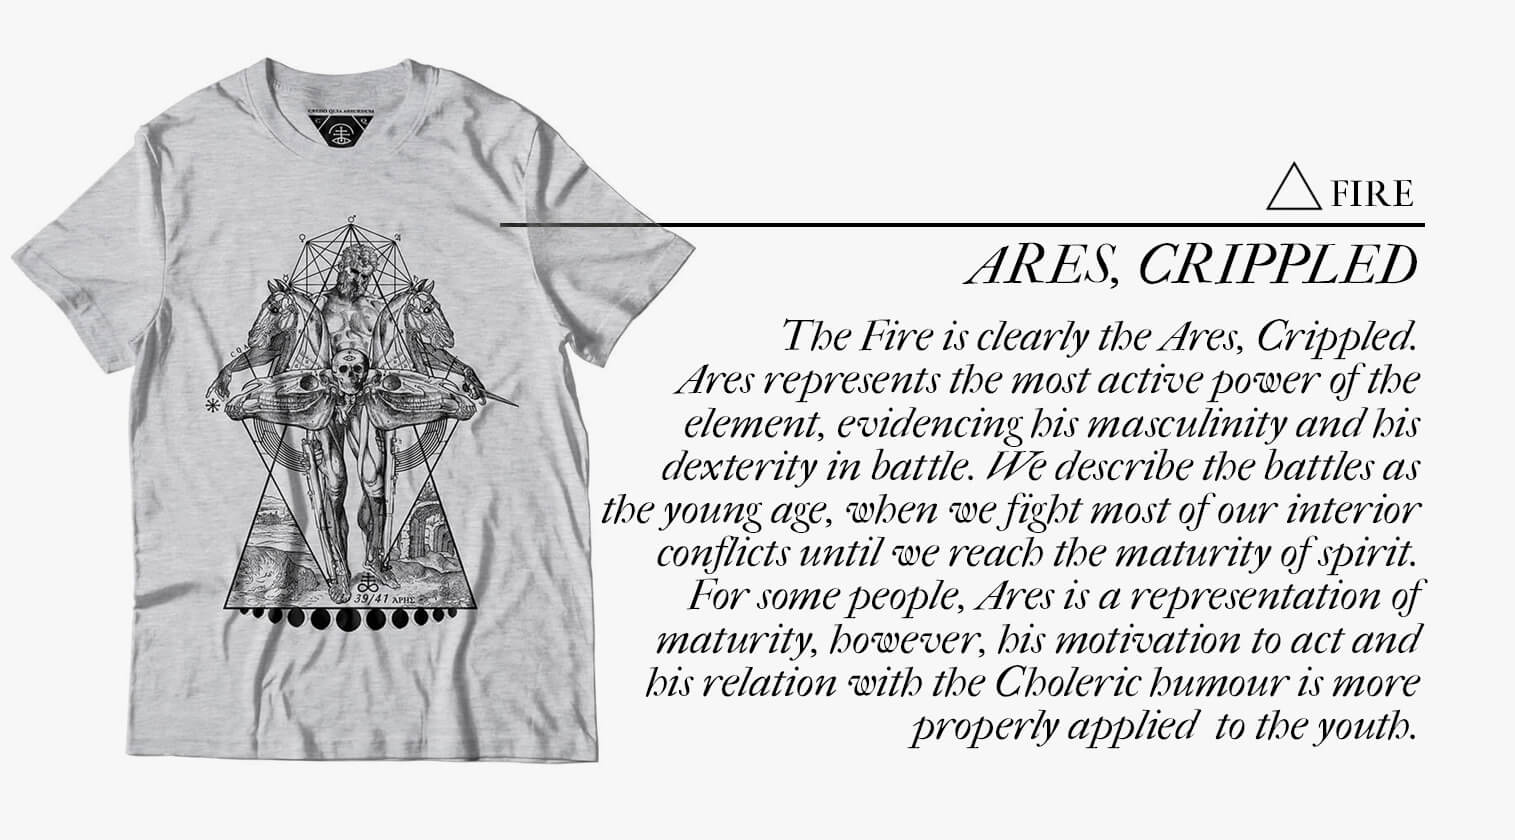 The Fire is clearly the Ares, Crippled. Ares represents the most active power of the element, evidencing his masculinity and his dexterity in battle. We describe the battles as the young age, when we fight most of our interior conflicts until we reach the maturity of spirit.  For some people, Ares is a representation of maturity, however, his motivation to act and his relation with the Choleric humour is more properly applied  to the youth. 